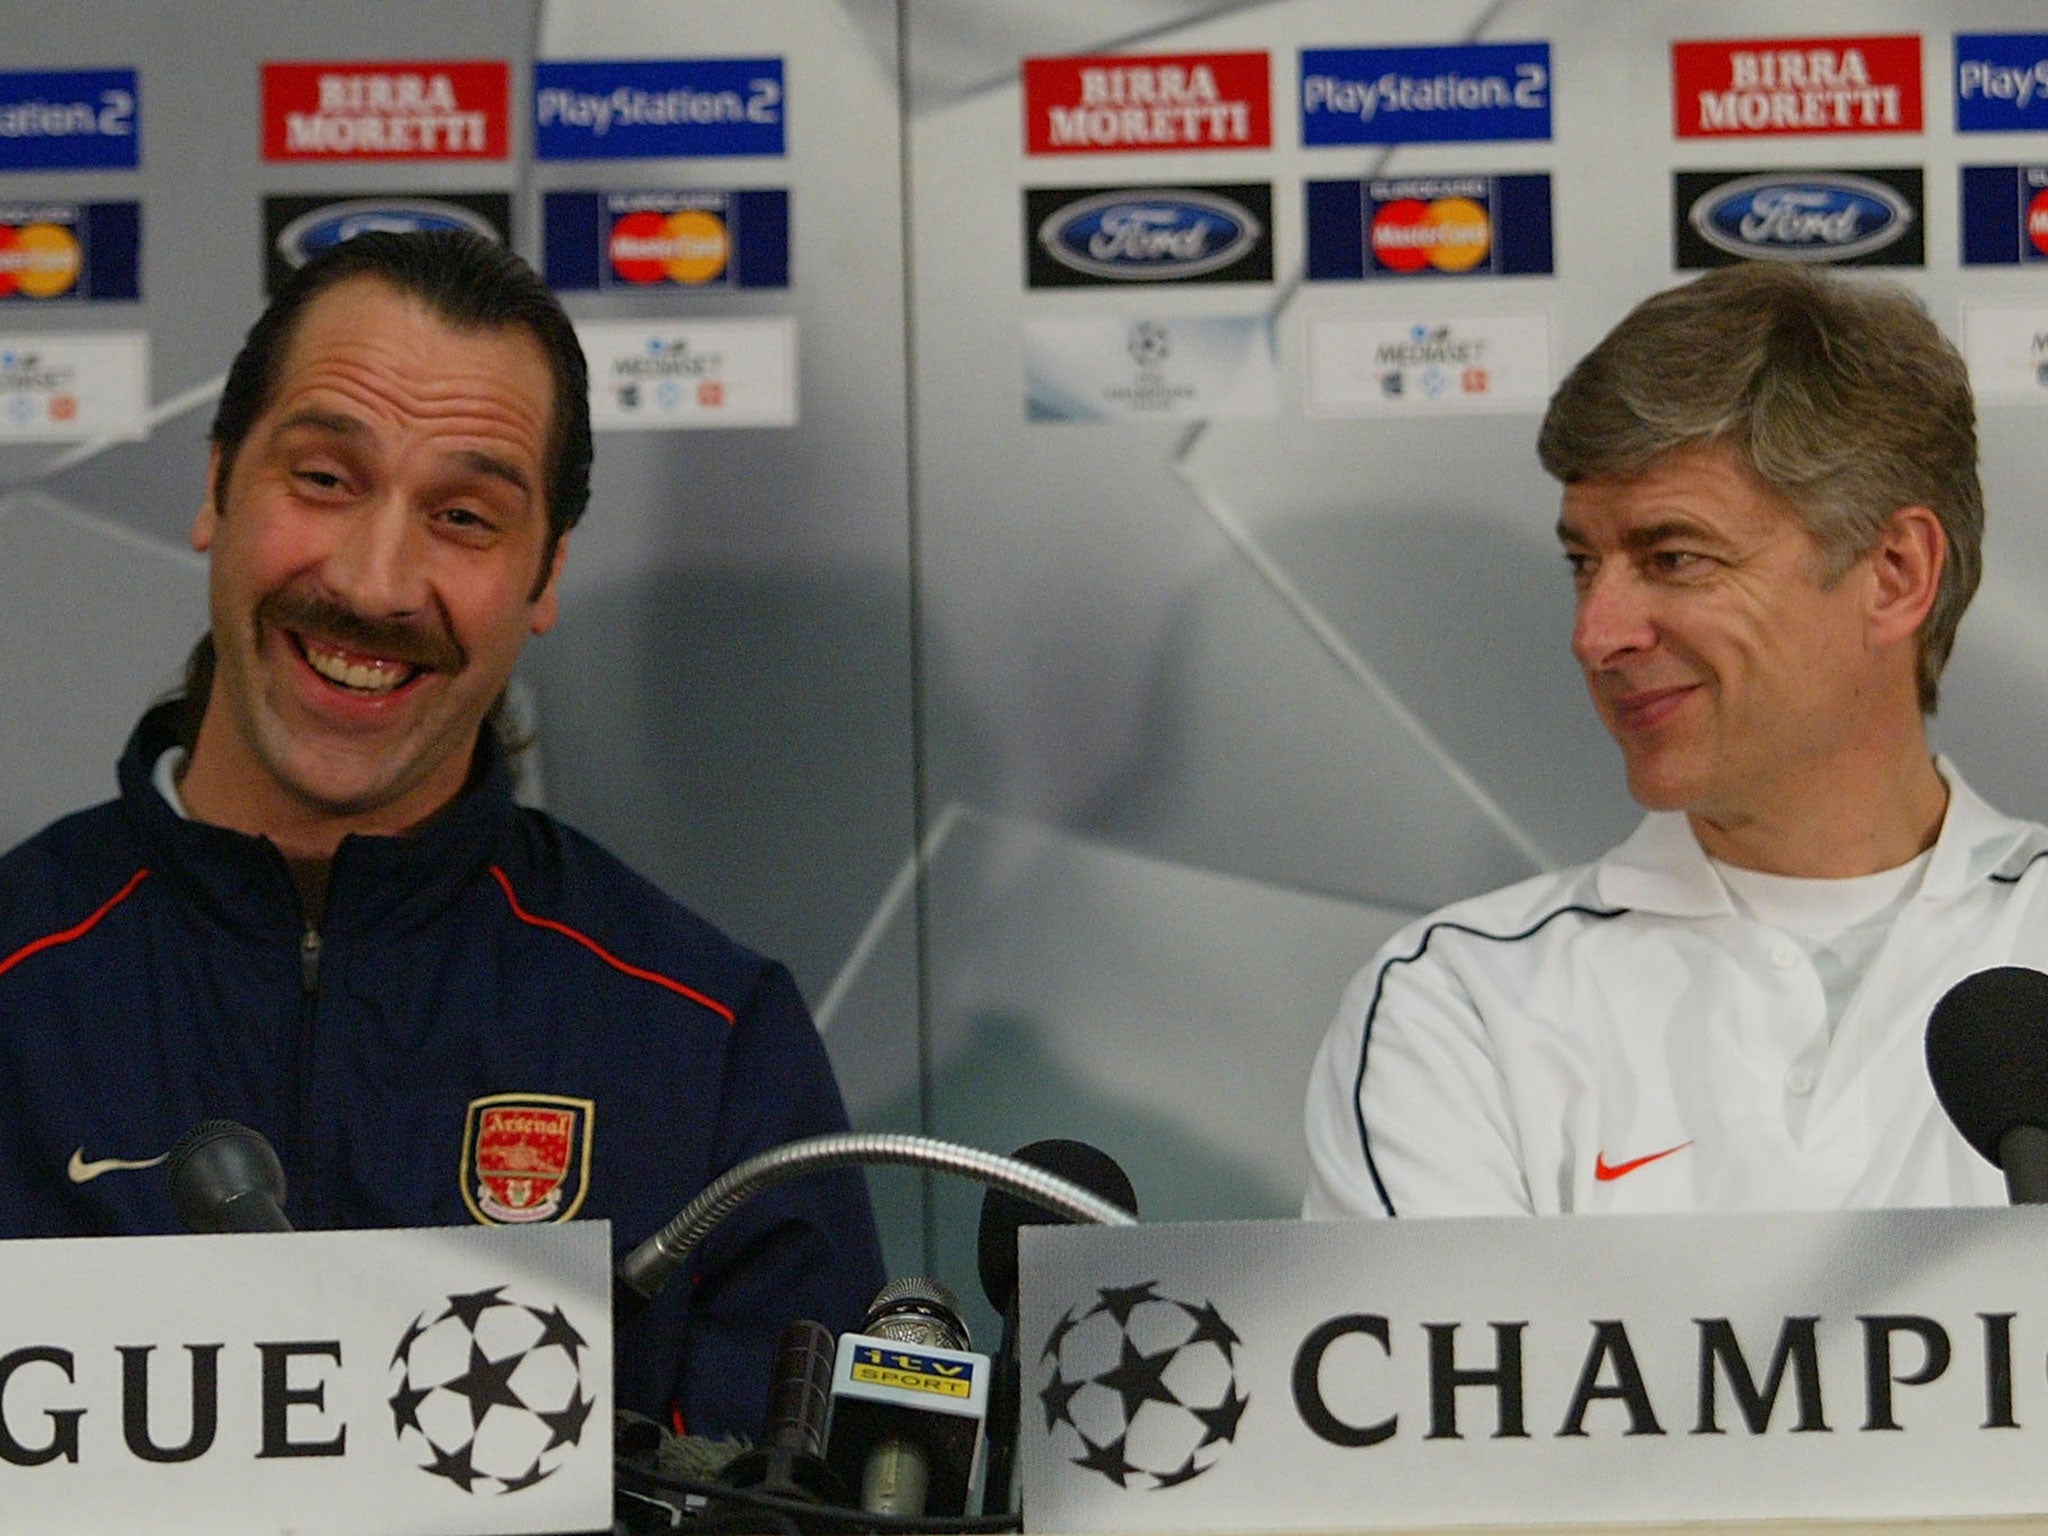 Arsenal manager Arsene Wenger and David Seaman at a press conference ahead of their Champions League match against Juventus at Delle Alpi Stadium, Turin